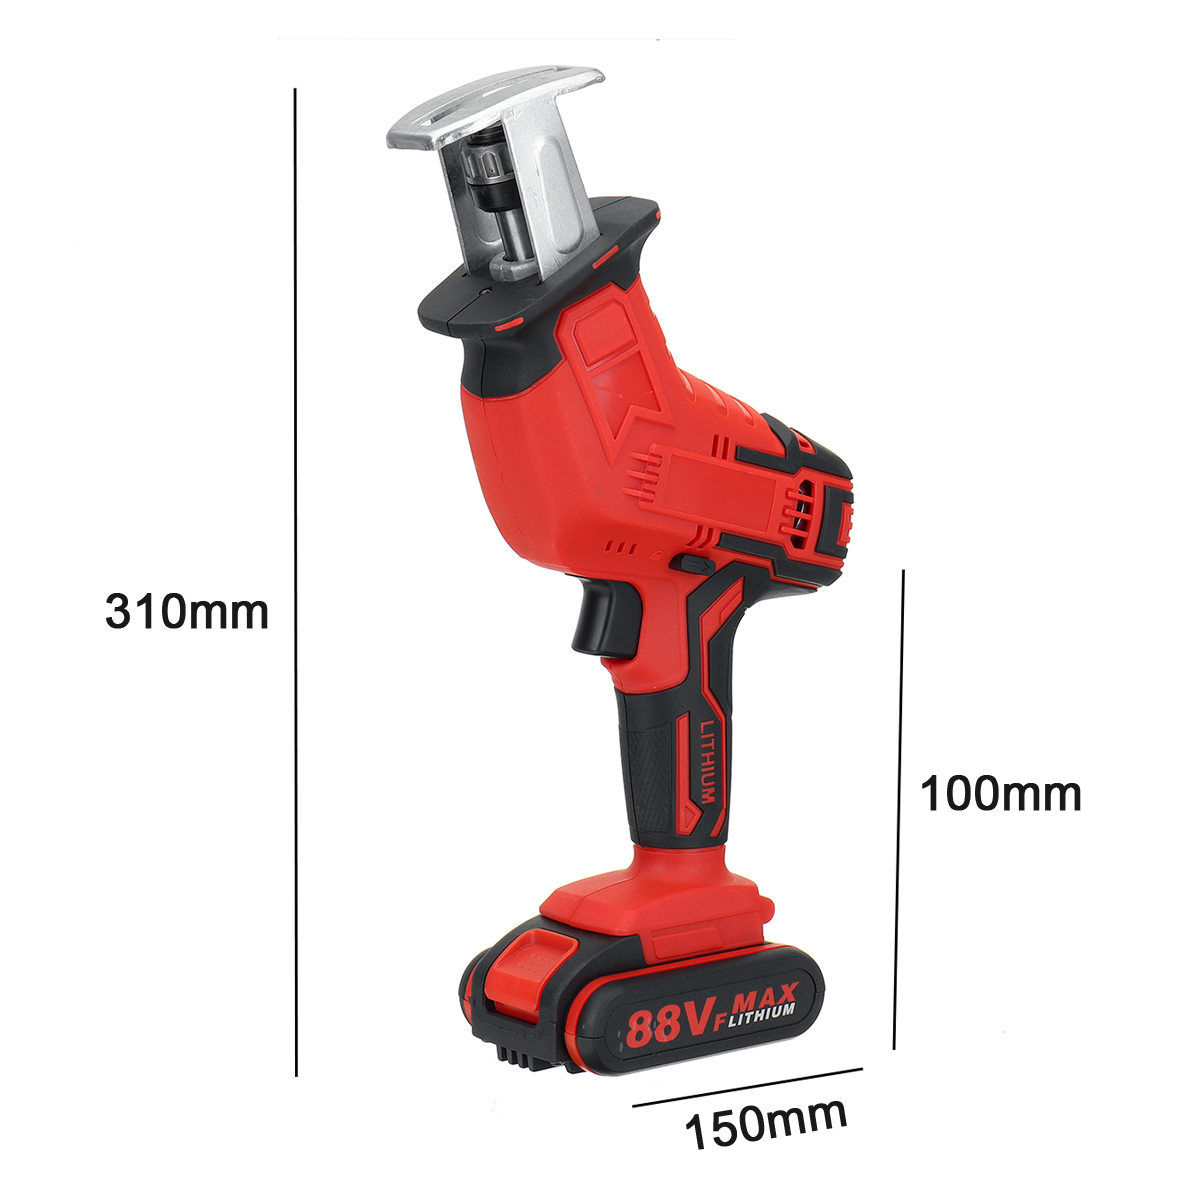 88VF-Cordless-Electric-Reciprocating-Saw-Outdoor-Portable-Woodworking-Tool-One-Hand-Saw-W-12-Battery-1883228-8